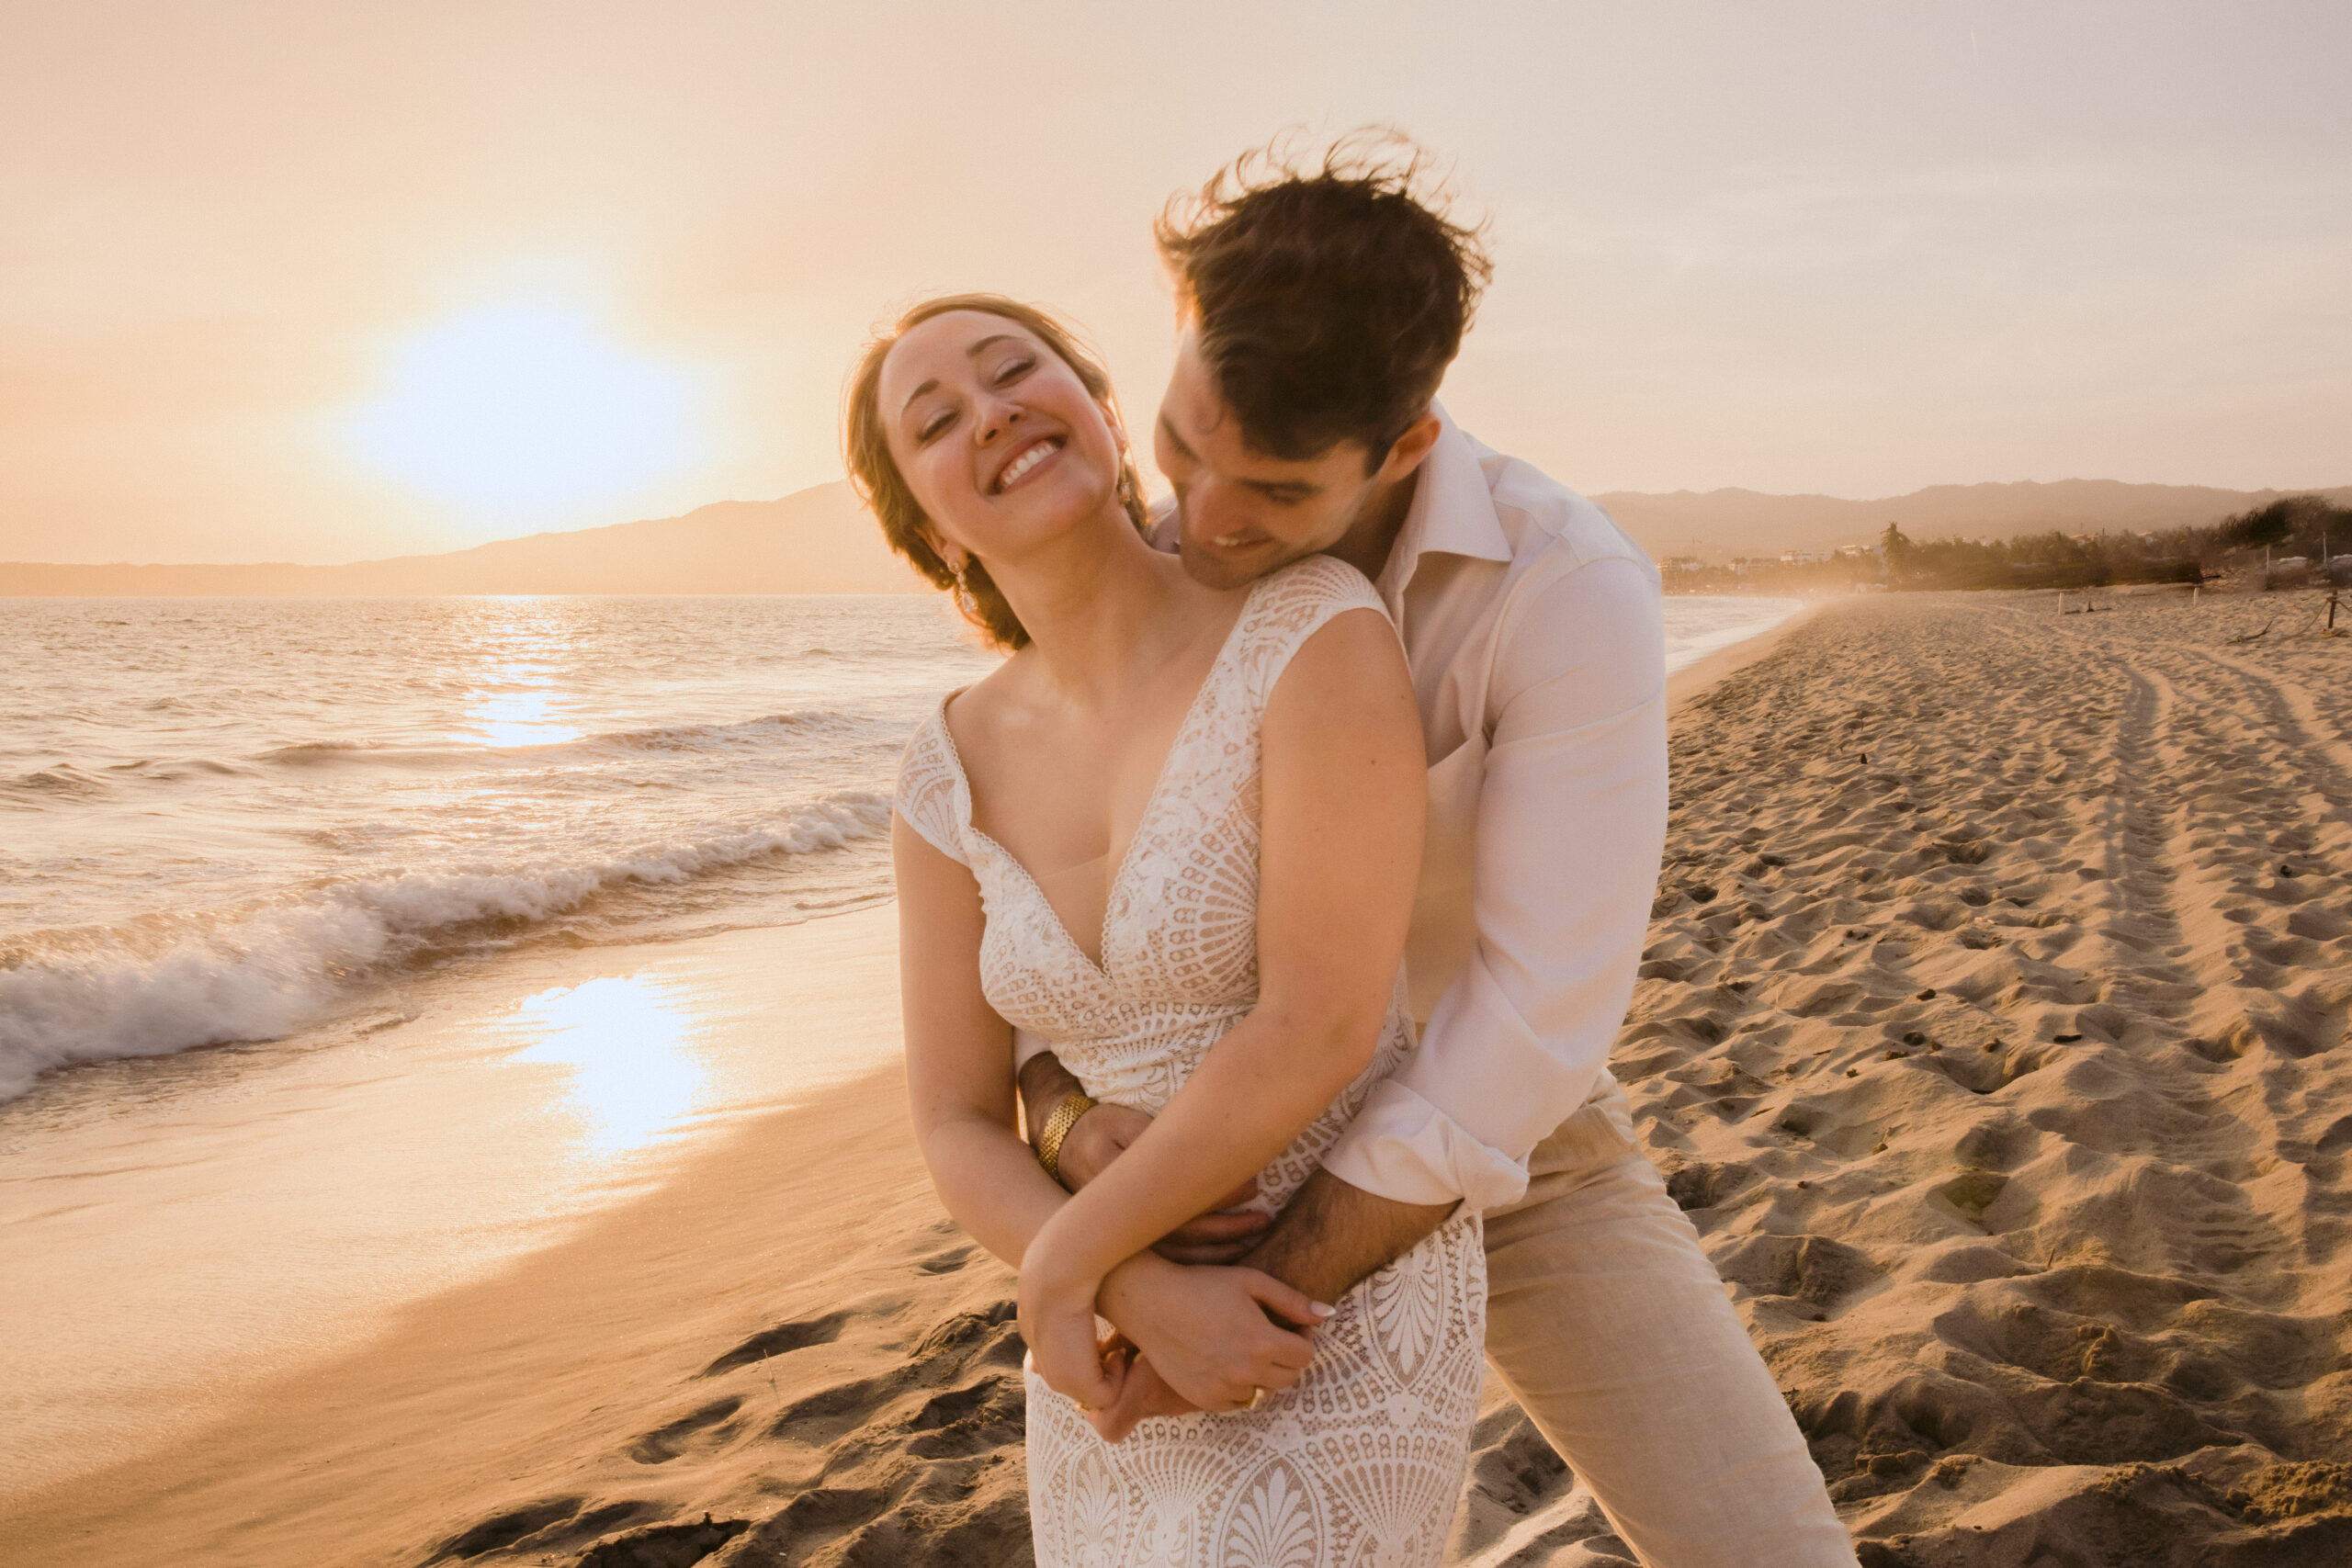 groom kissing bride's neck while on beach at sunset.